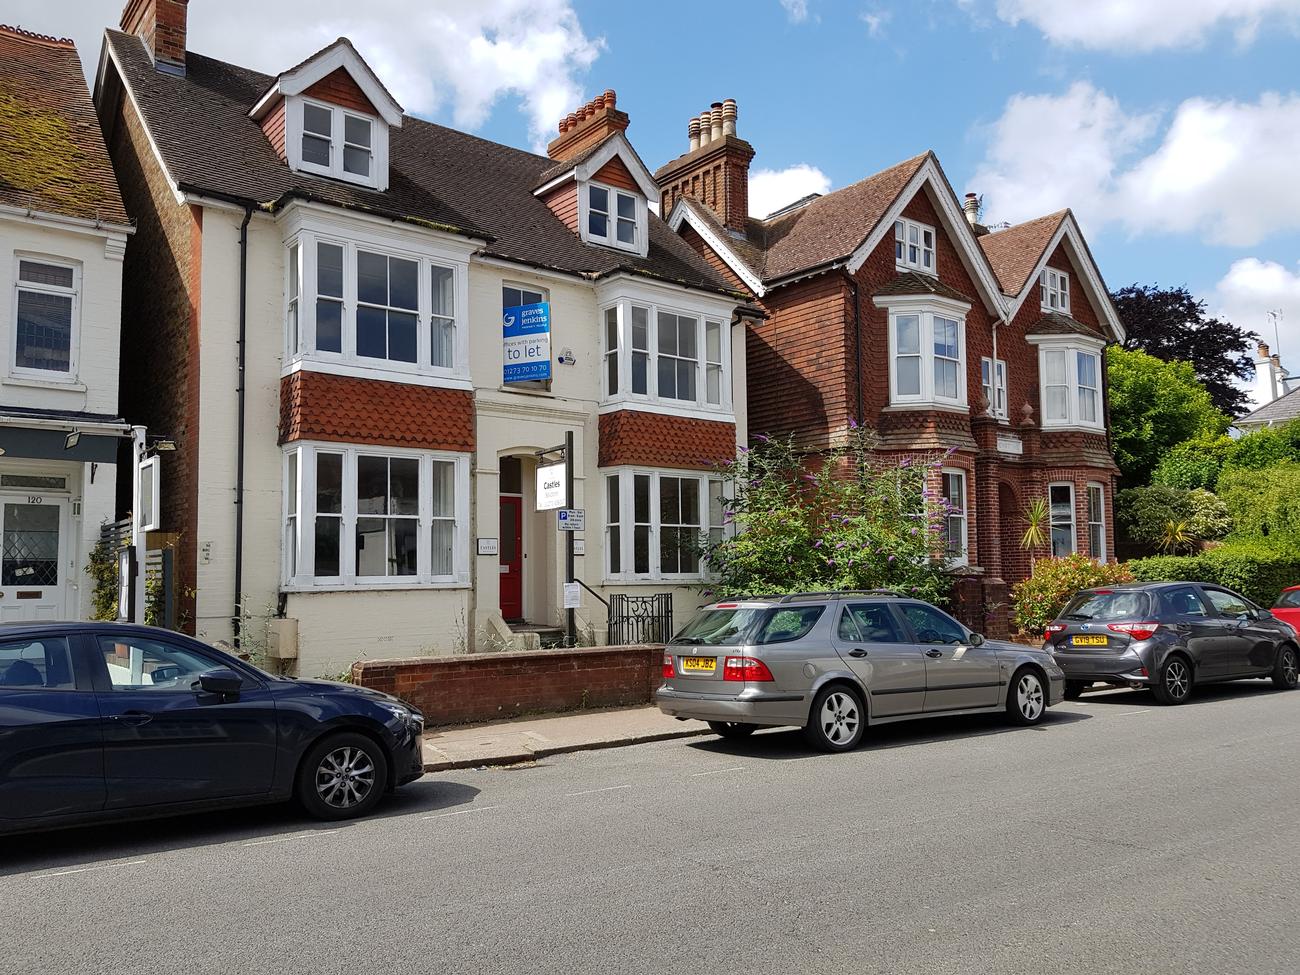 Gallery | Chartered Surveyor in Hurstpeirpoint and West Sussex gallery image 6